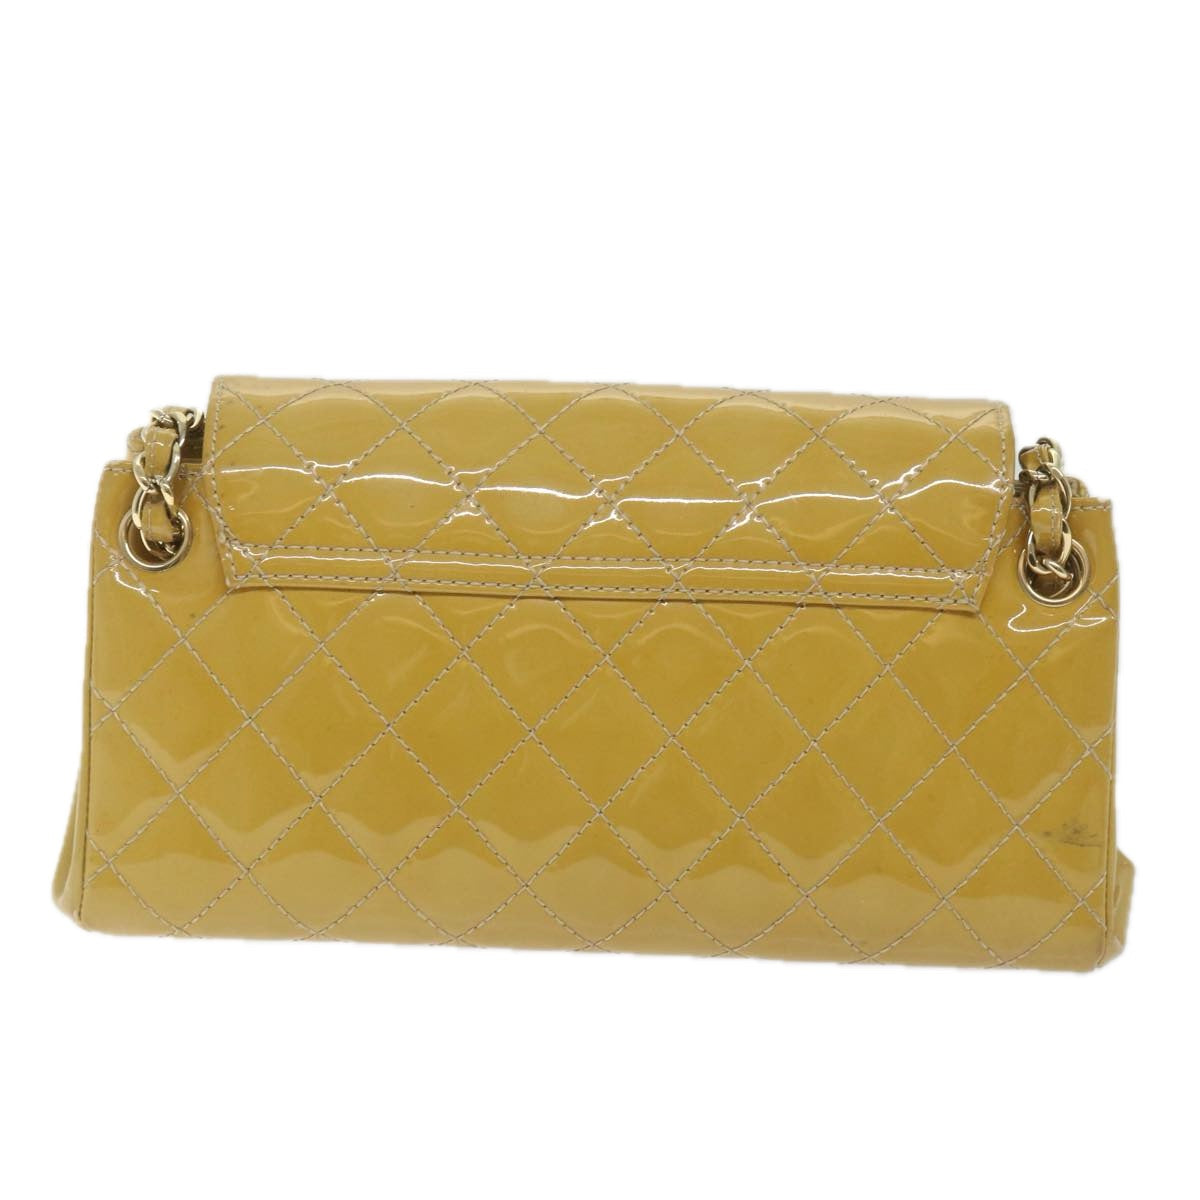 CHANEL Matelasse Chain Shoulder Bag Patent leather Yellow CC Auth 58350A